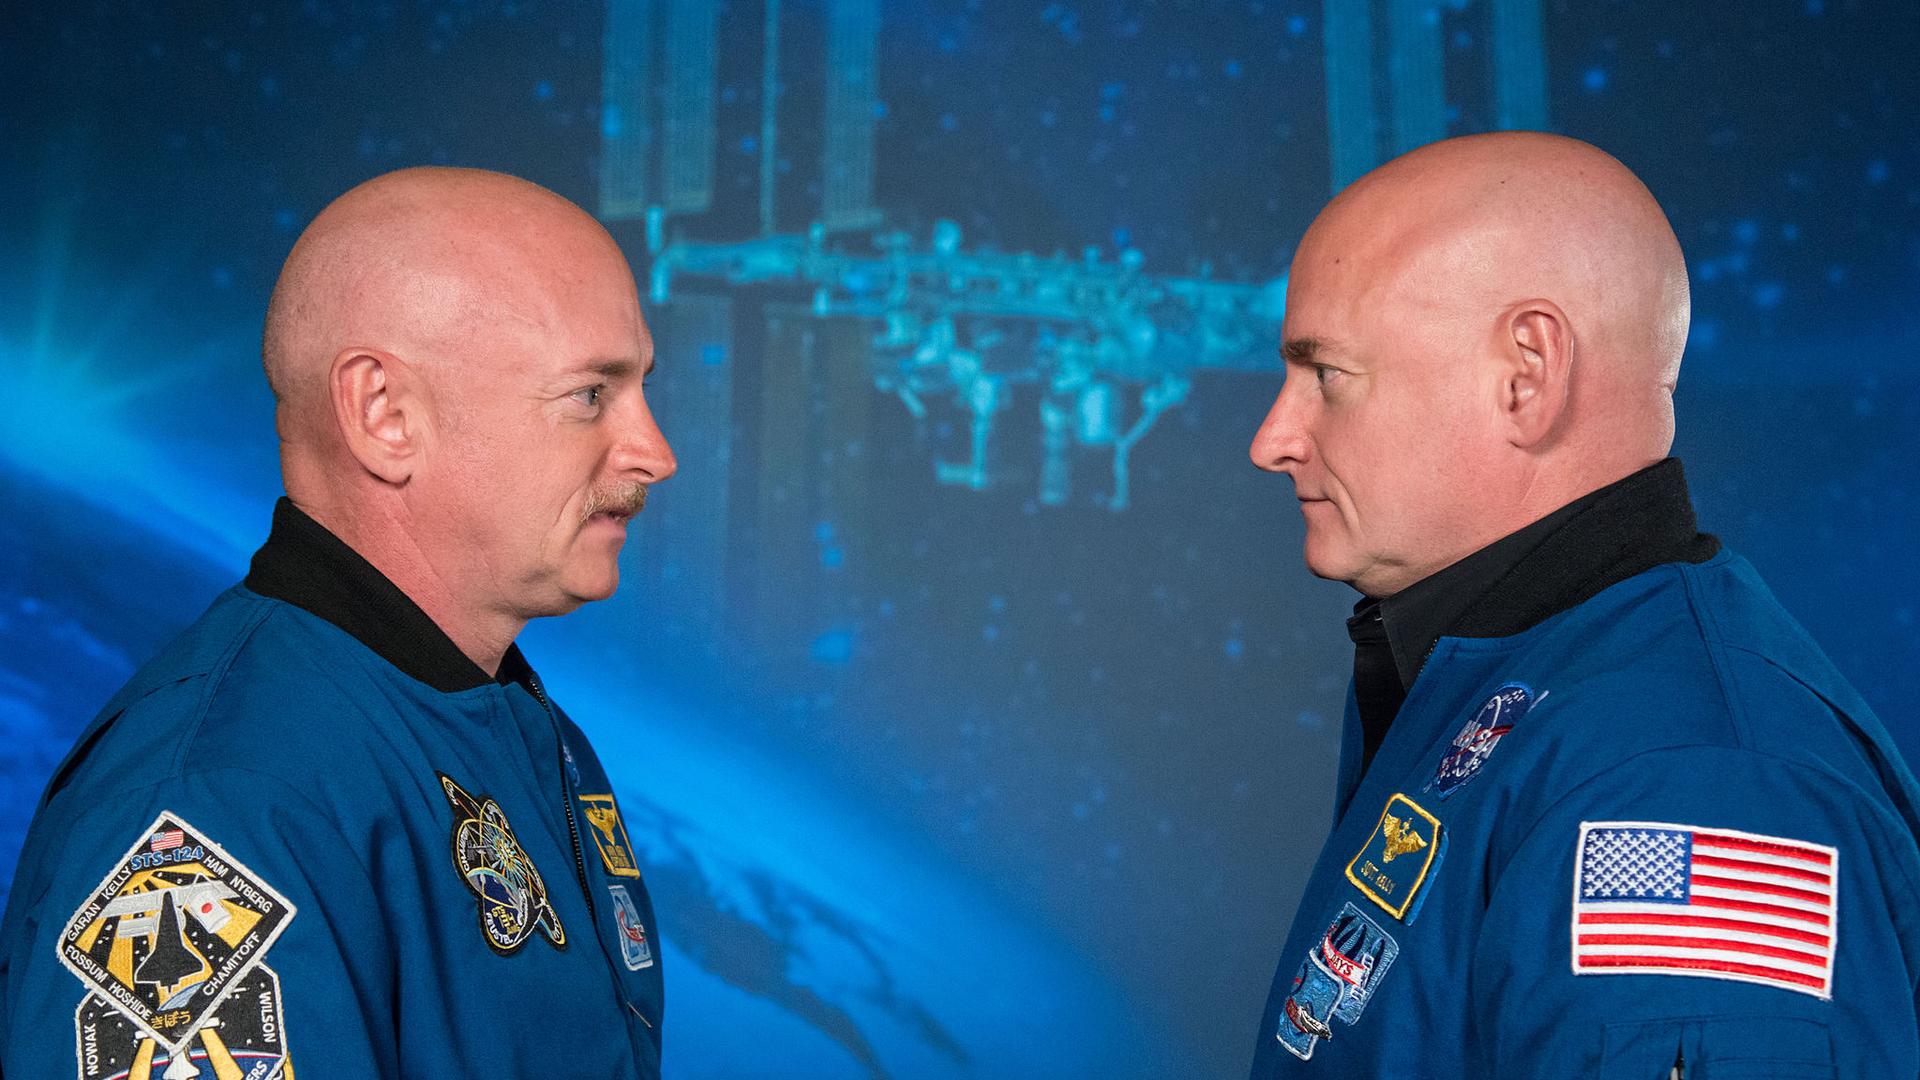 Former astronaut Mark Kelly, left, stands across from his brother, Scott Kelly, the current commander of the International Space Station.